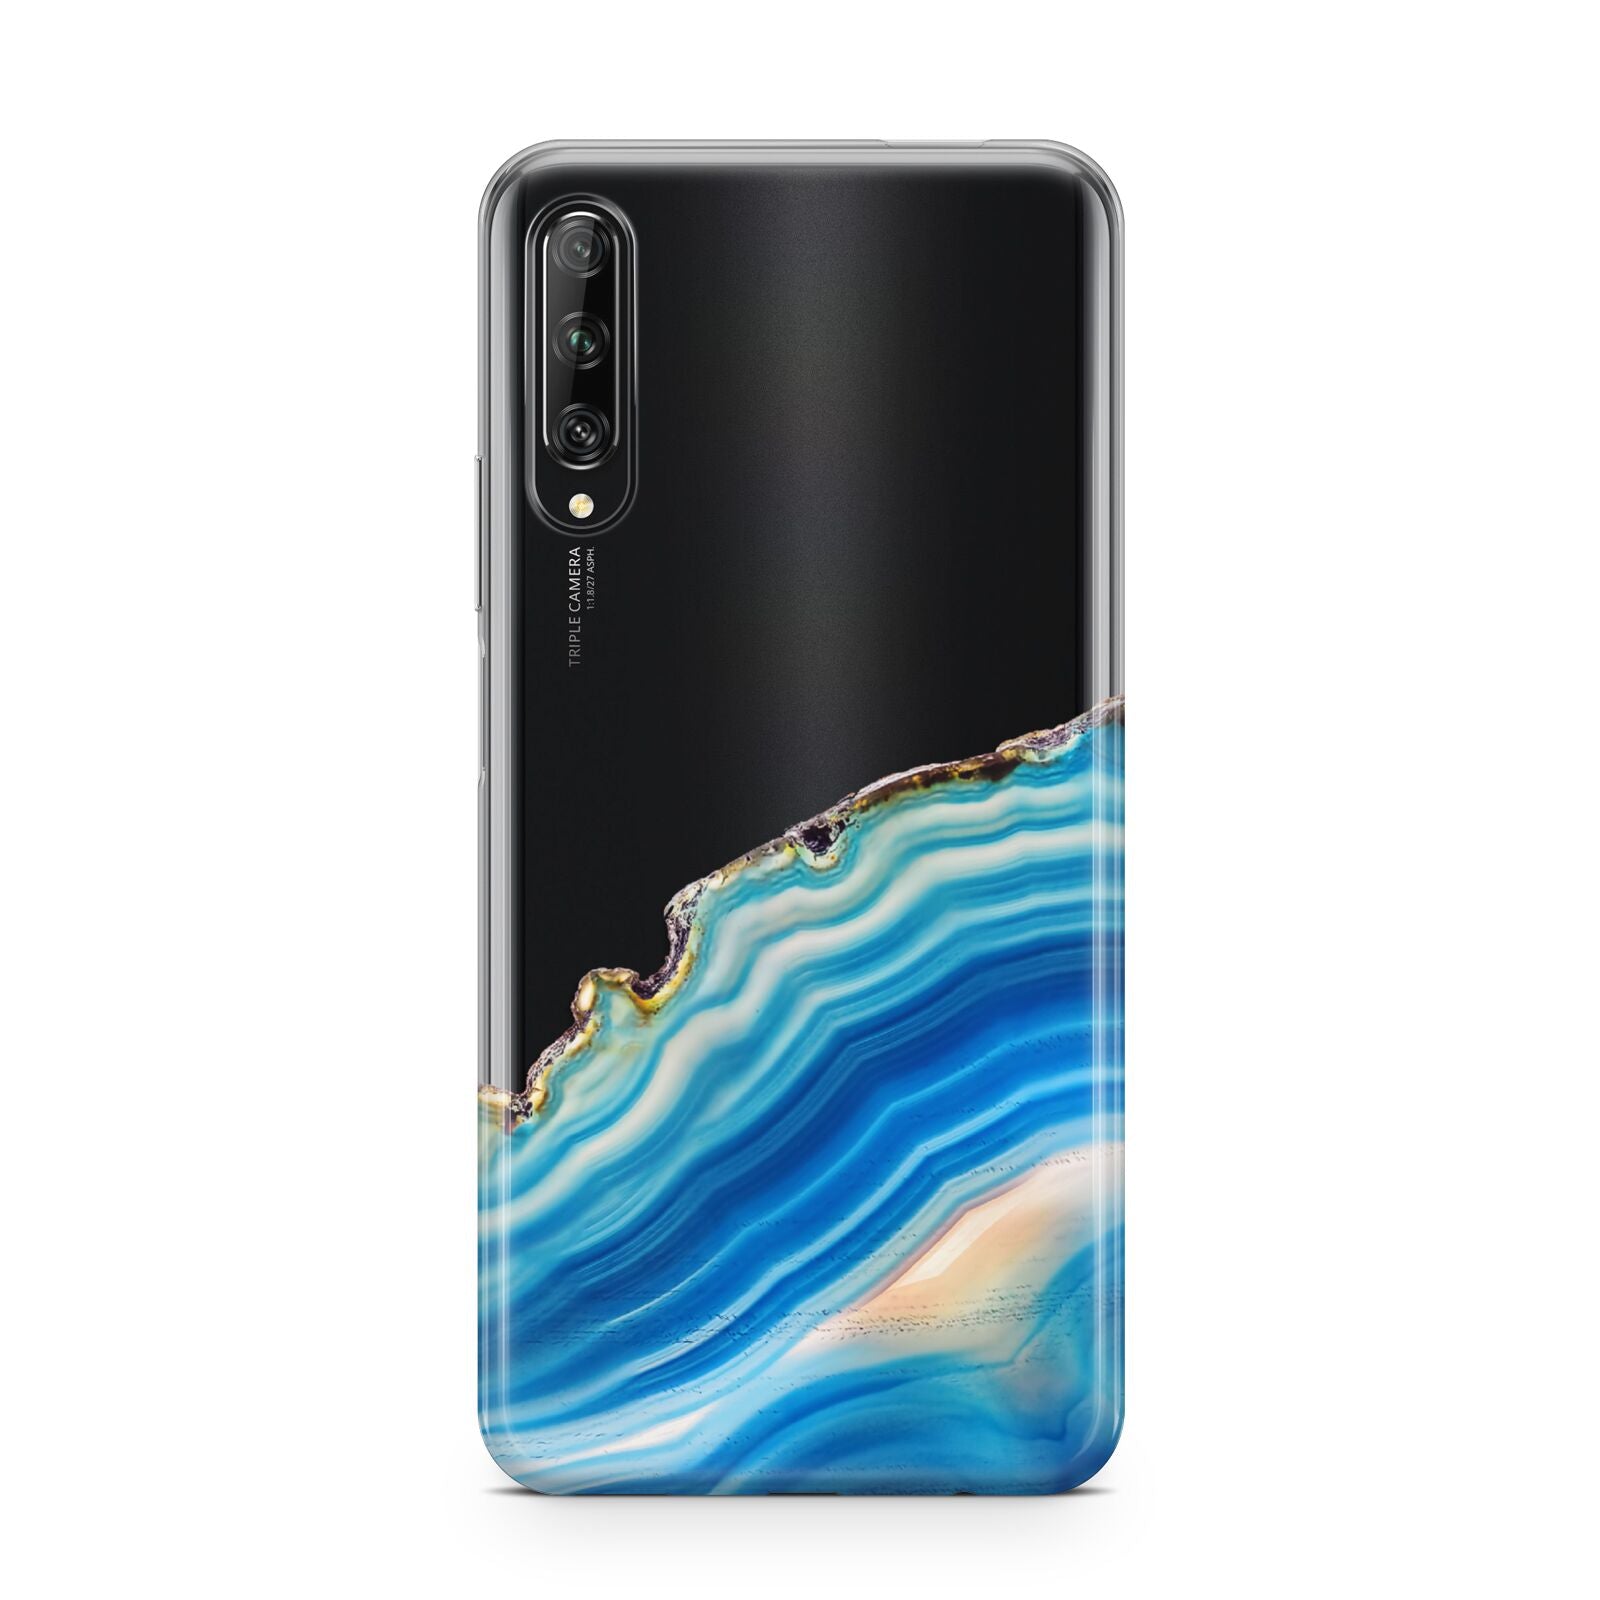 Agate Pale Blue and Bright Blue Huawei P Smart Pro 2019